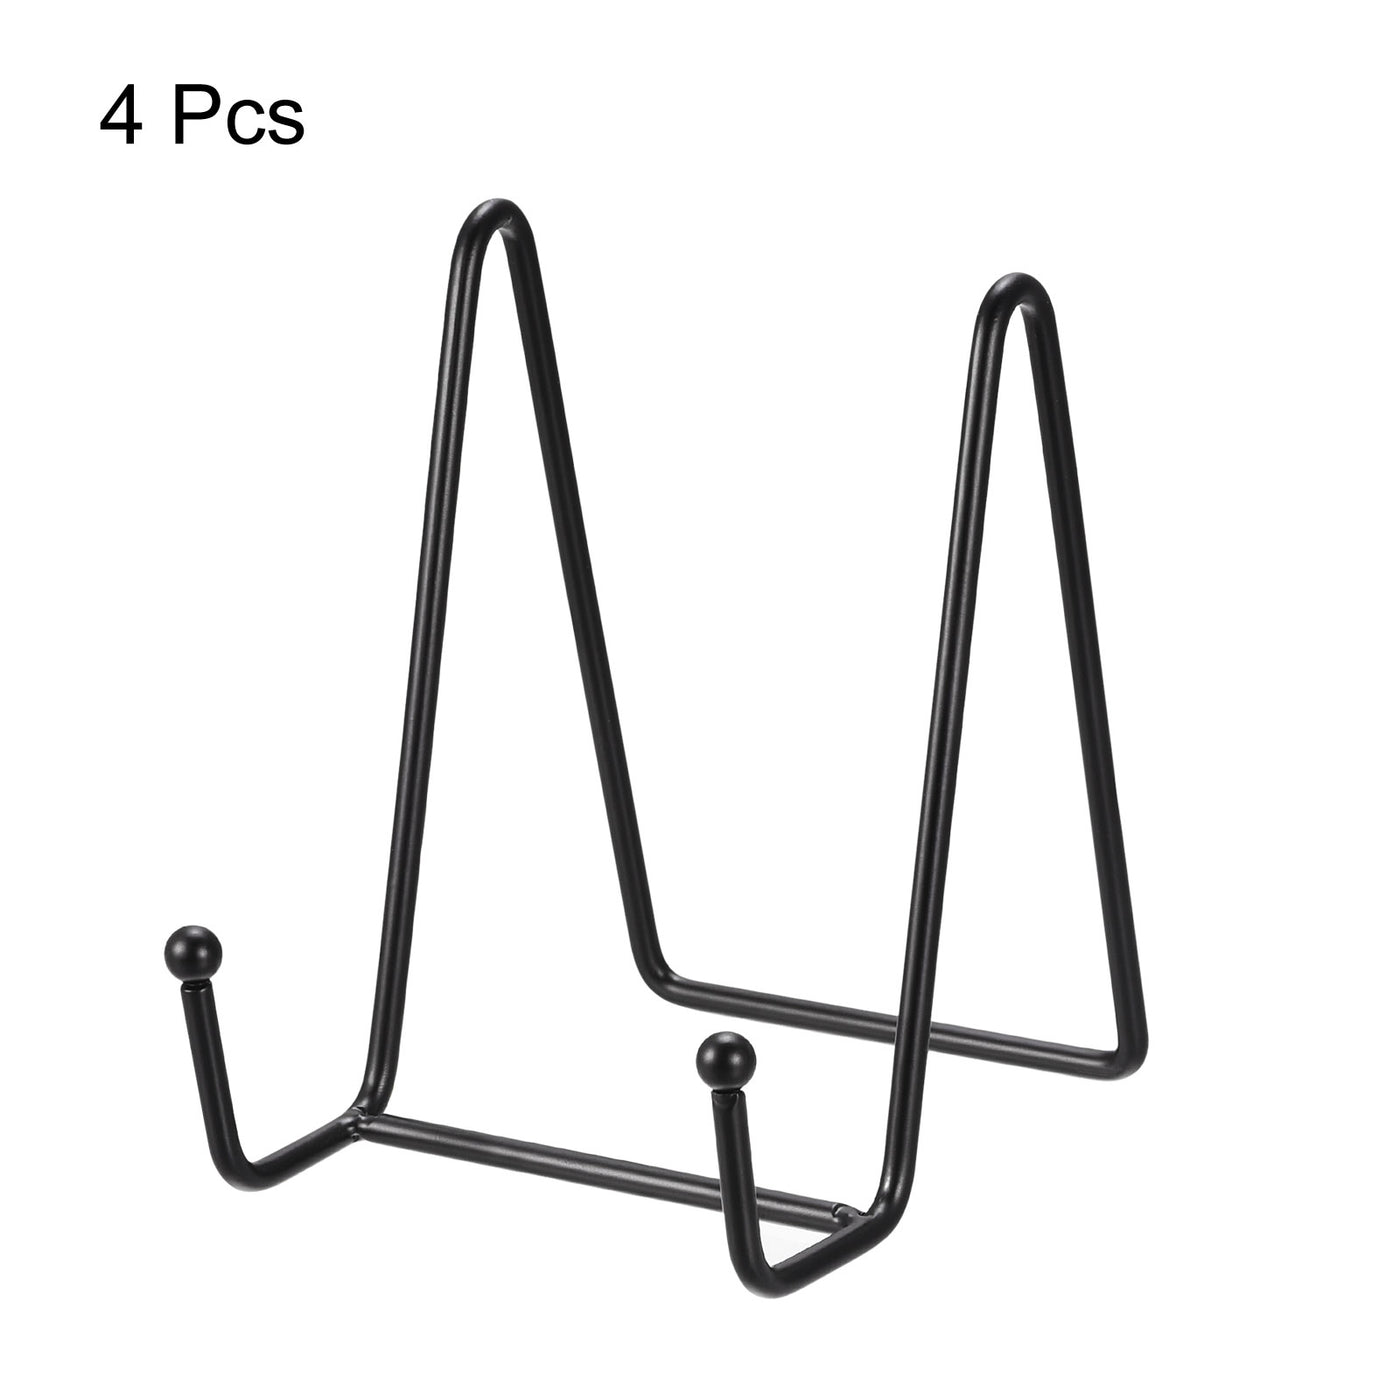 uxcell Uxcell 4pcs 4.3 Inch Plate Stands for Display, Iron Easel Holder Black for Decorative Picture Frame